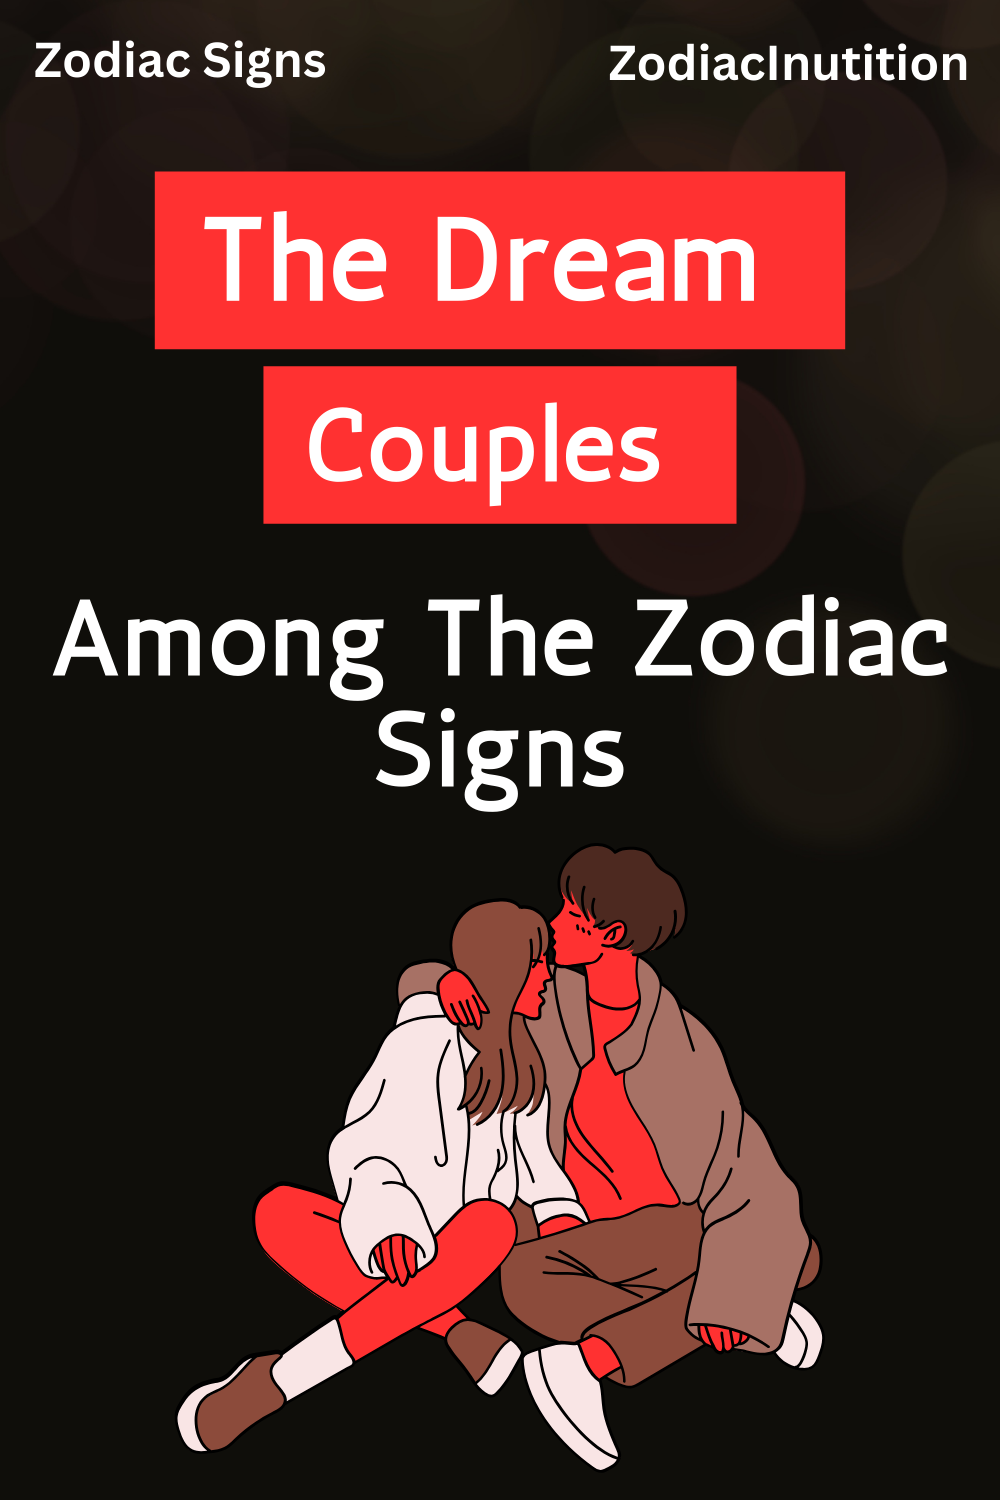 The Dream Couples Among The Zodiac Signs